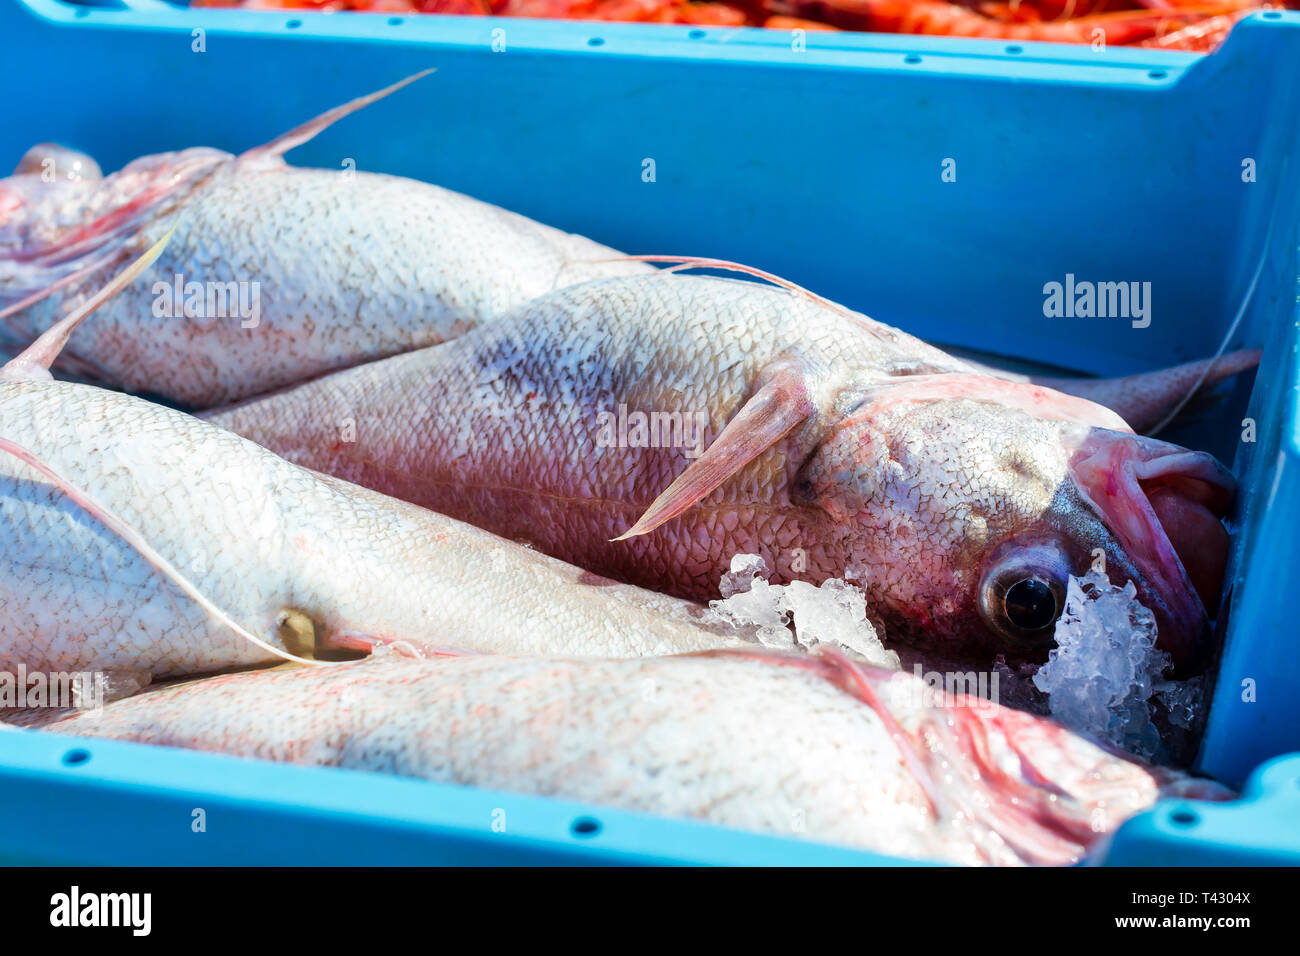 Blue plastic containers with catch of sea fish, ocean delicacies. Industrial catch of fresh fish. Fish auction for wholesalers and restaurants. Blanes Stock Photo